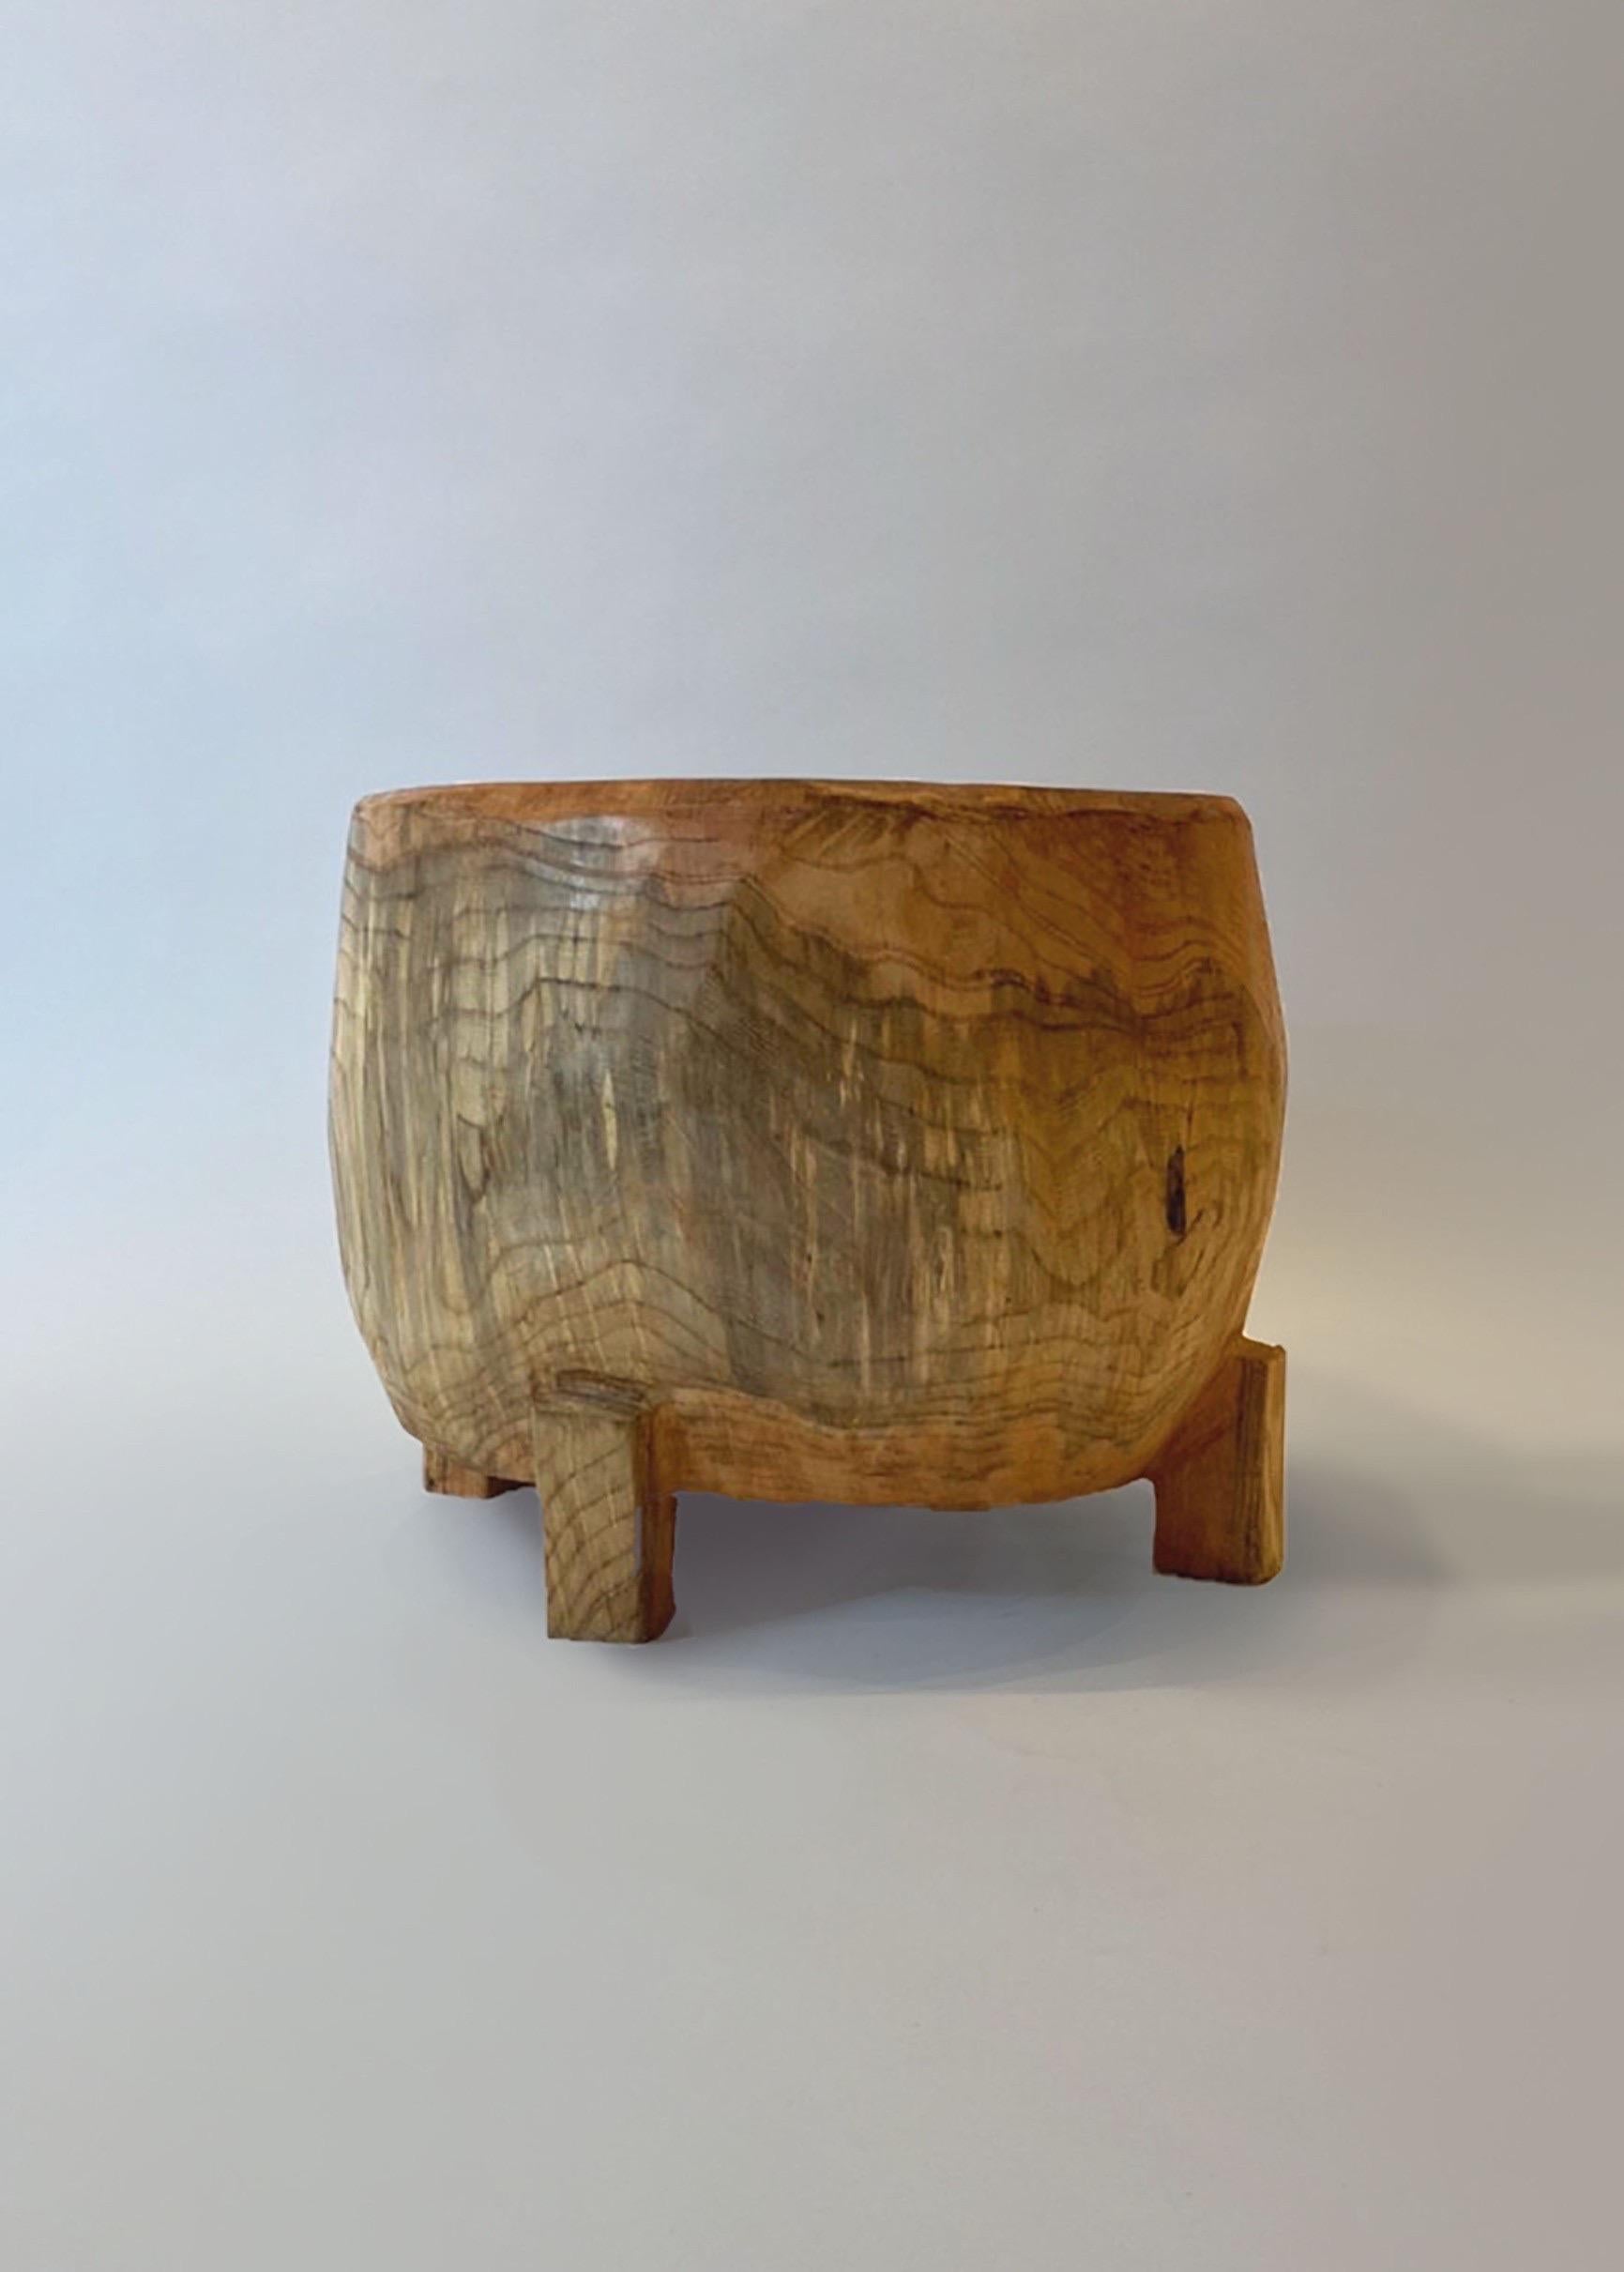 Name: Daifuku
Sculptural stool by Zogei carved furniture
Material: Zelkova
This work is carved from log with some kinds of chainsaws.
Most of wood used for Nishimura's works are unable to use anything, these woods are unsuitable material for